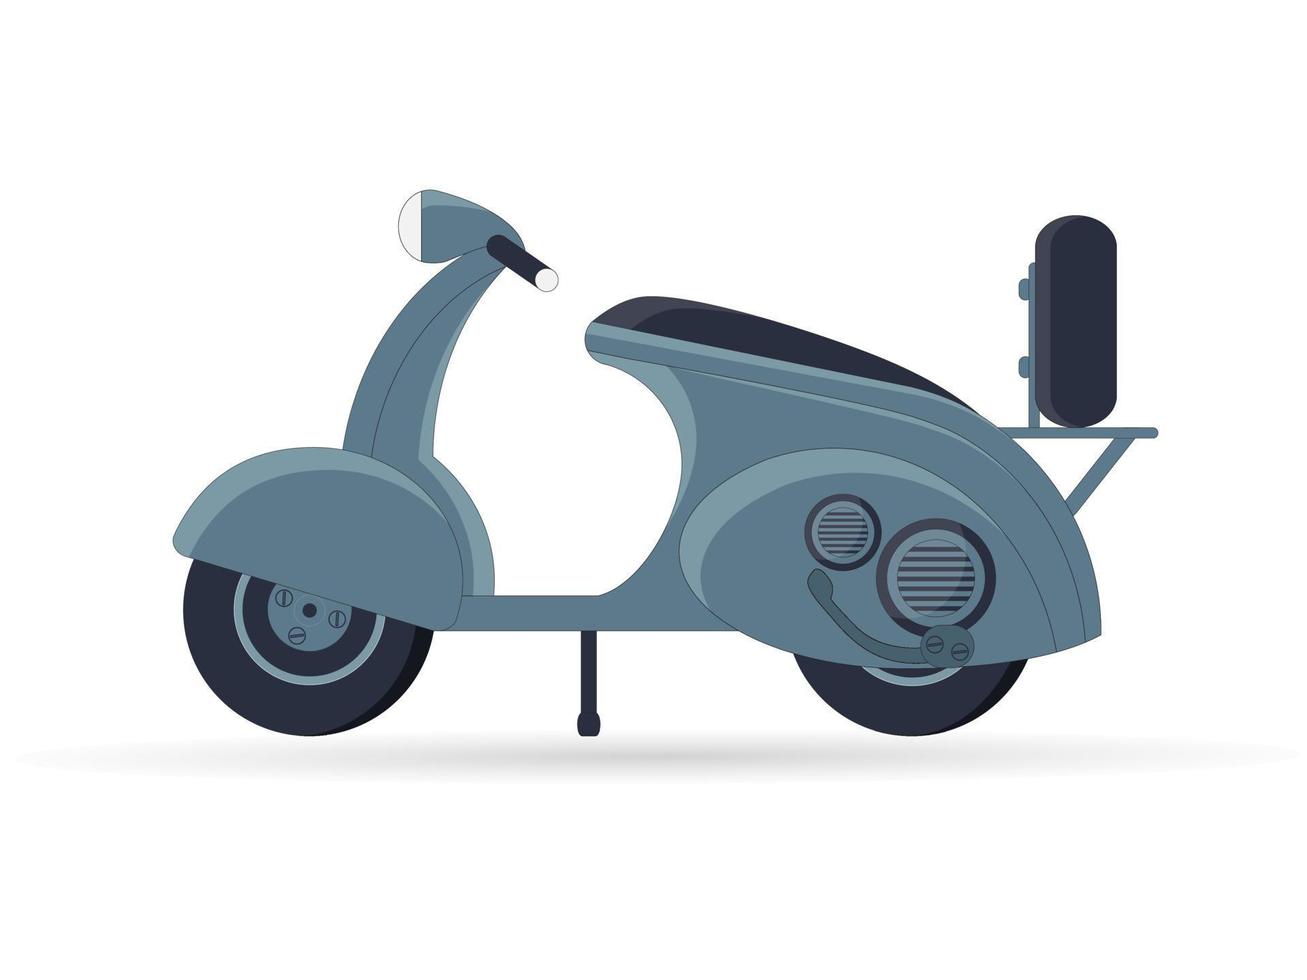 Blue vintage scooter with spare tire - Scooter motorcycle illustration. Vector illustration isolated on white